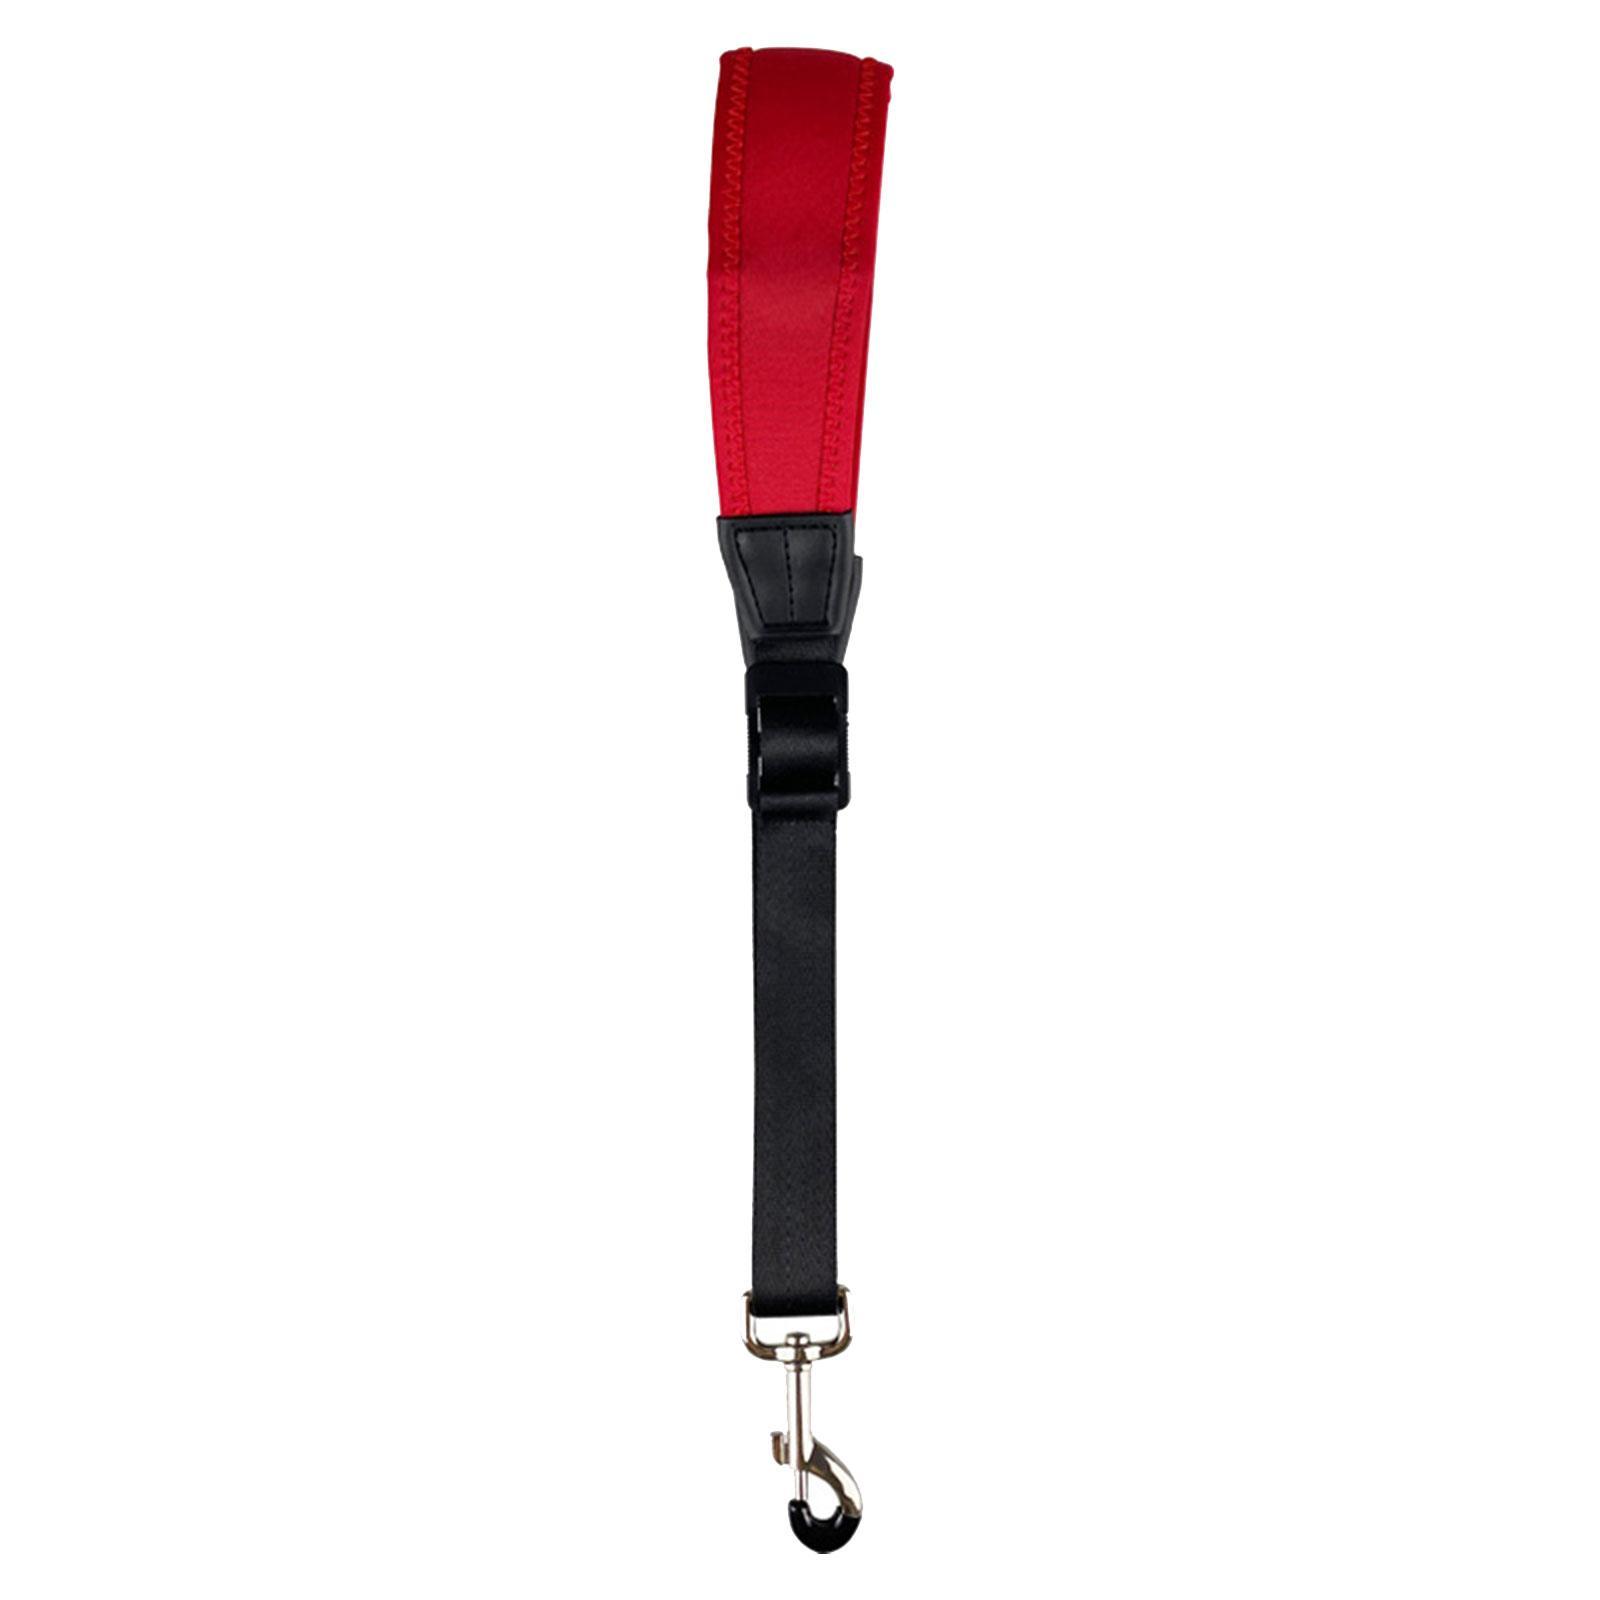 Saxophone Strap Sax Neck Strap Breathable Adjustable Neckband Soft Neck Pad Easily Disassemble with Buckle Universal Wind Instrument Strap